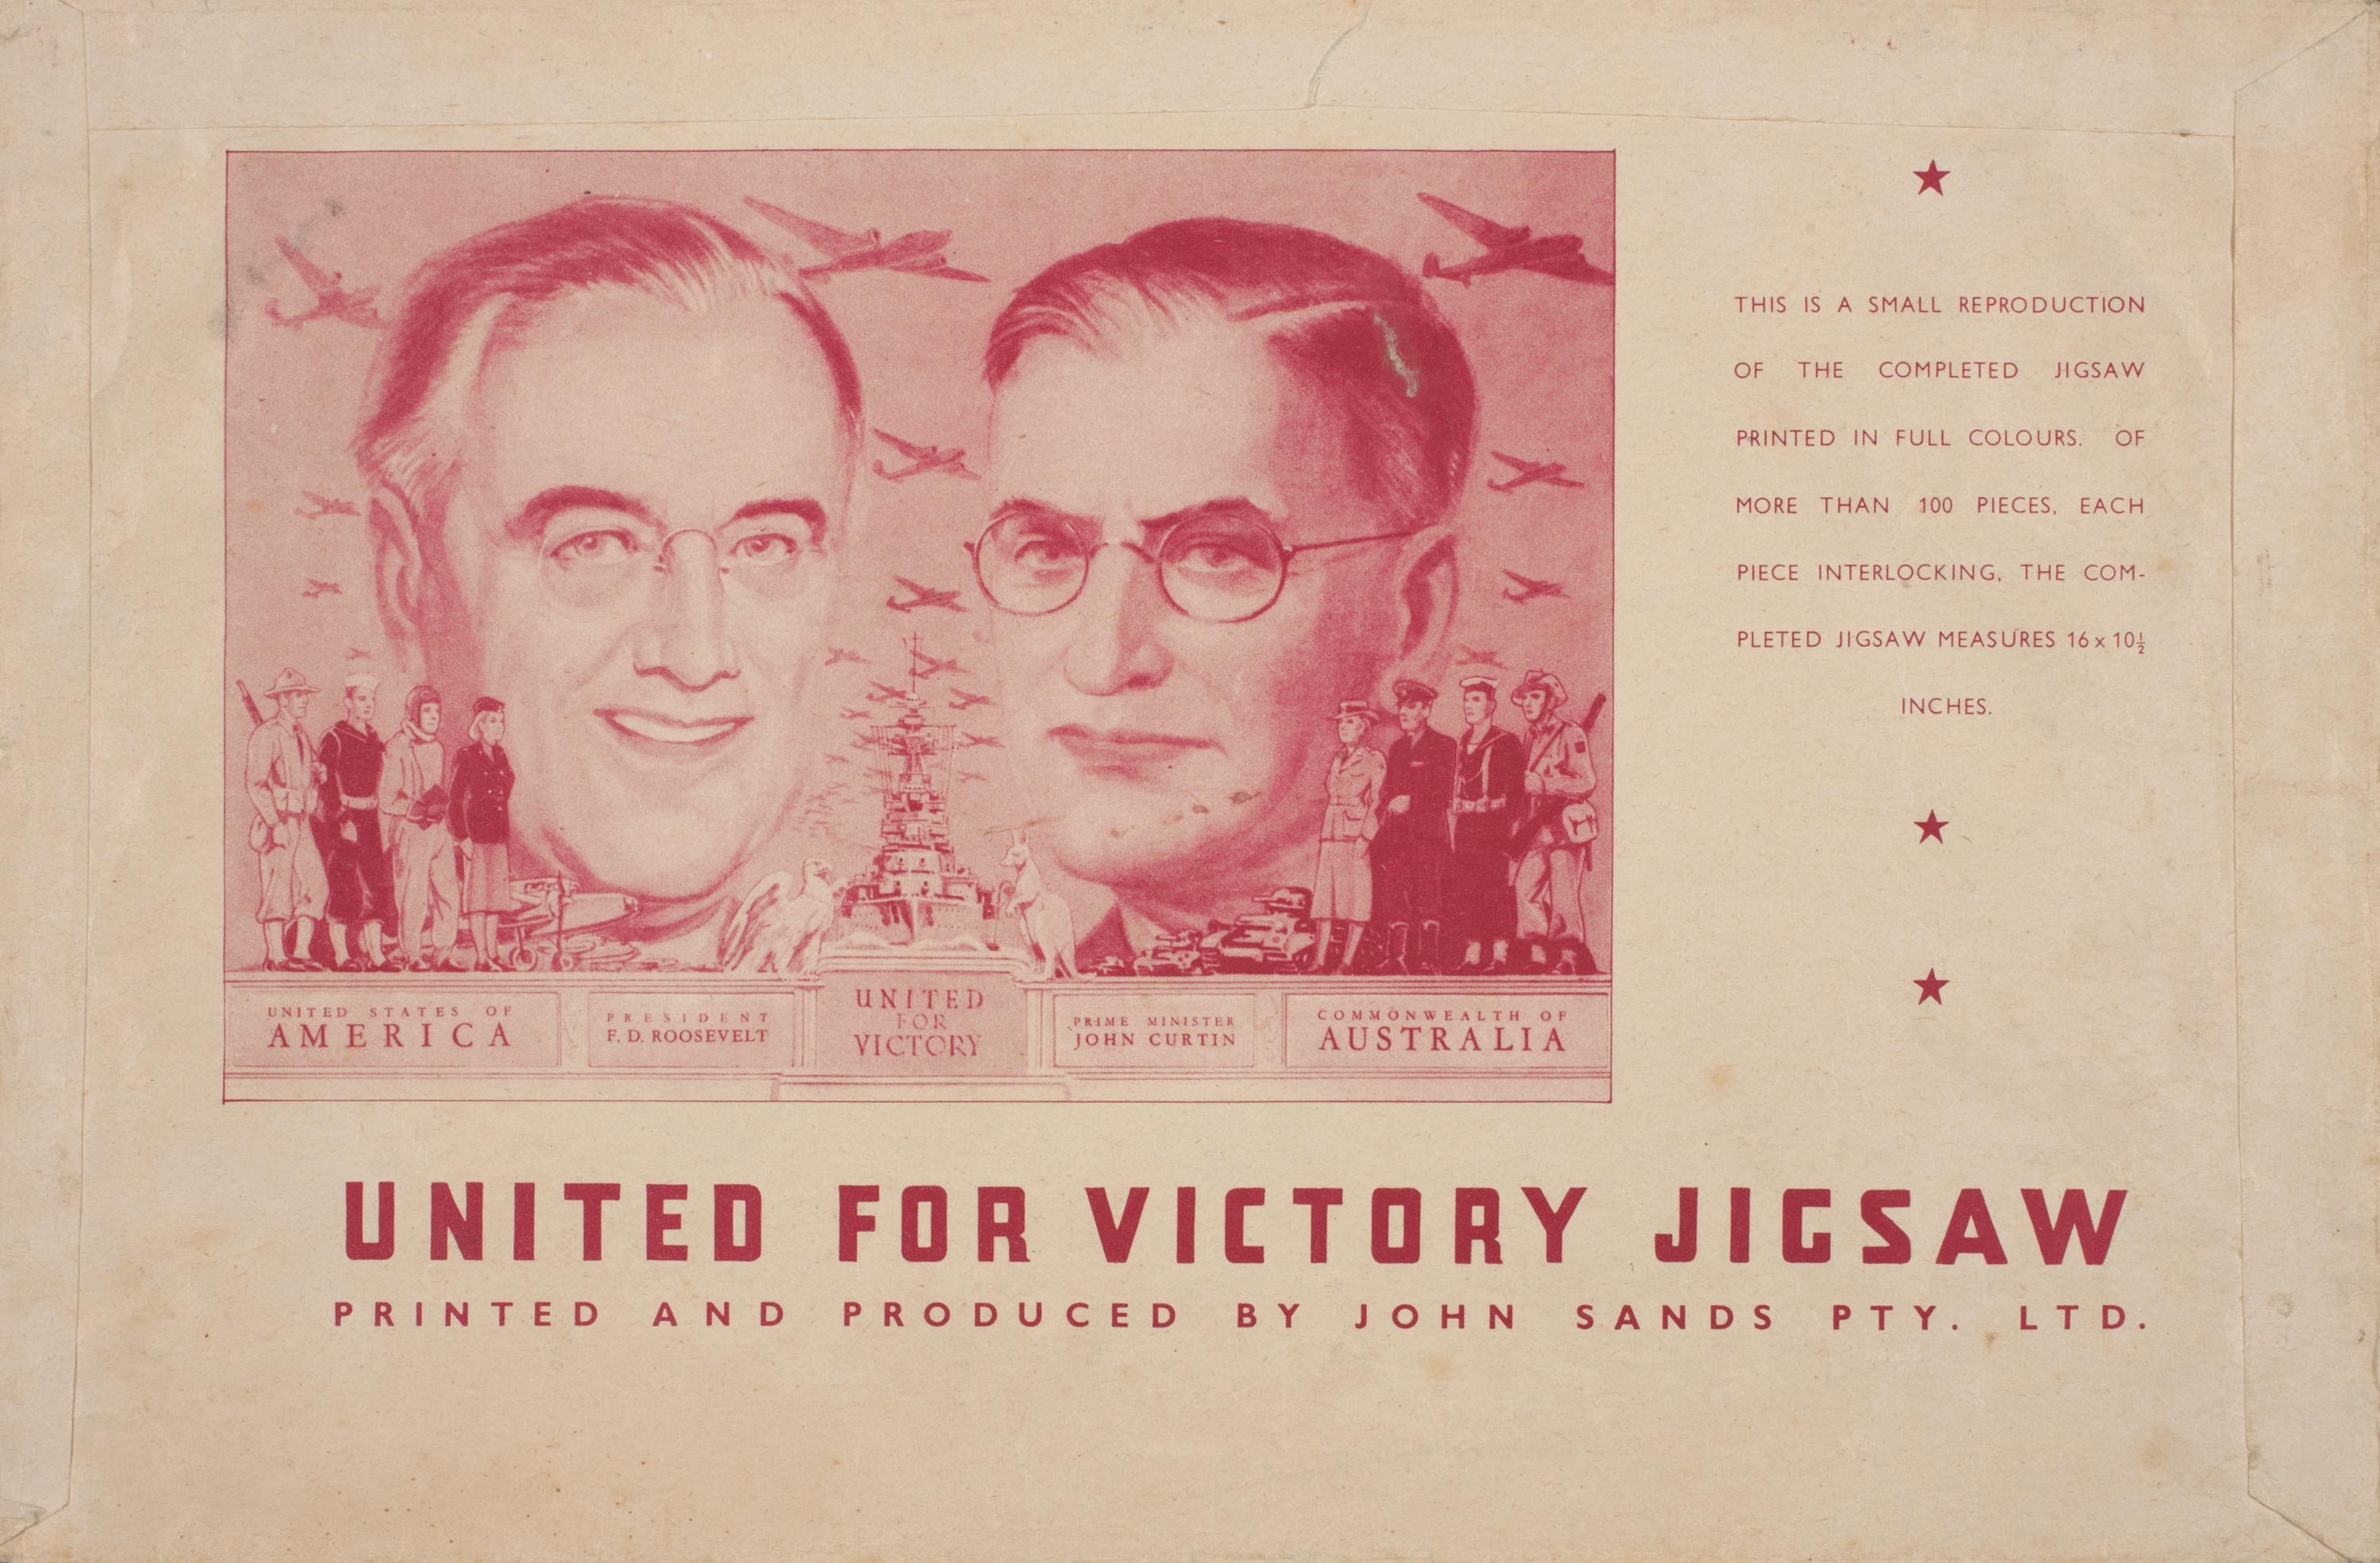 Envelope advertising a jigsaw puzzle titled ‘United for Victory’.